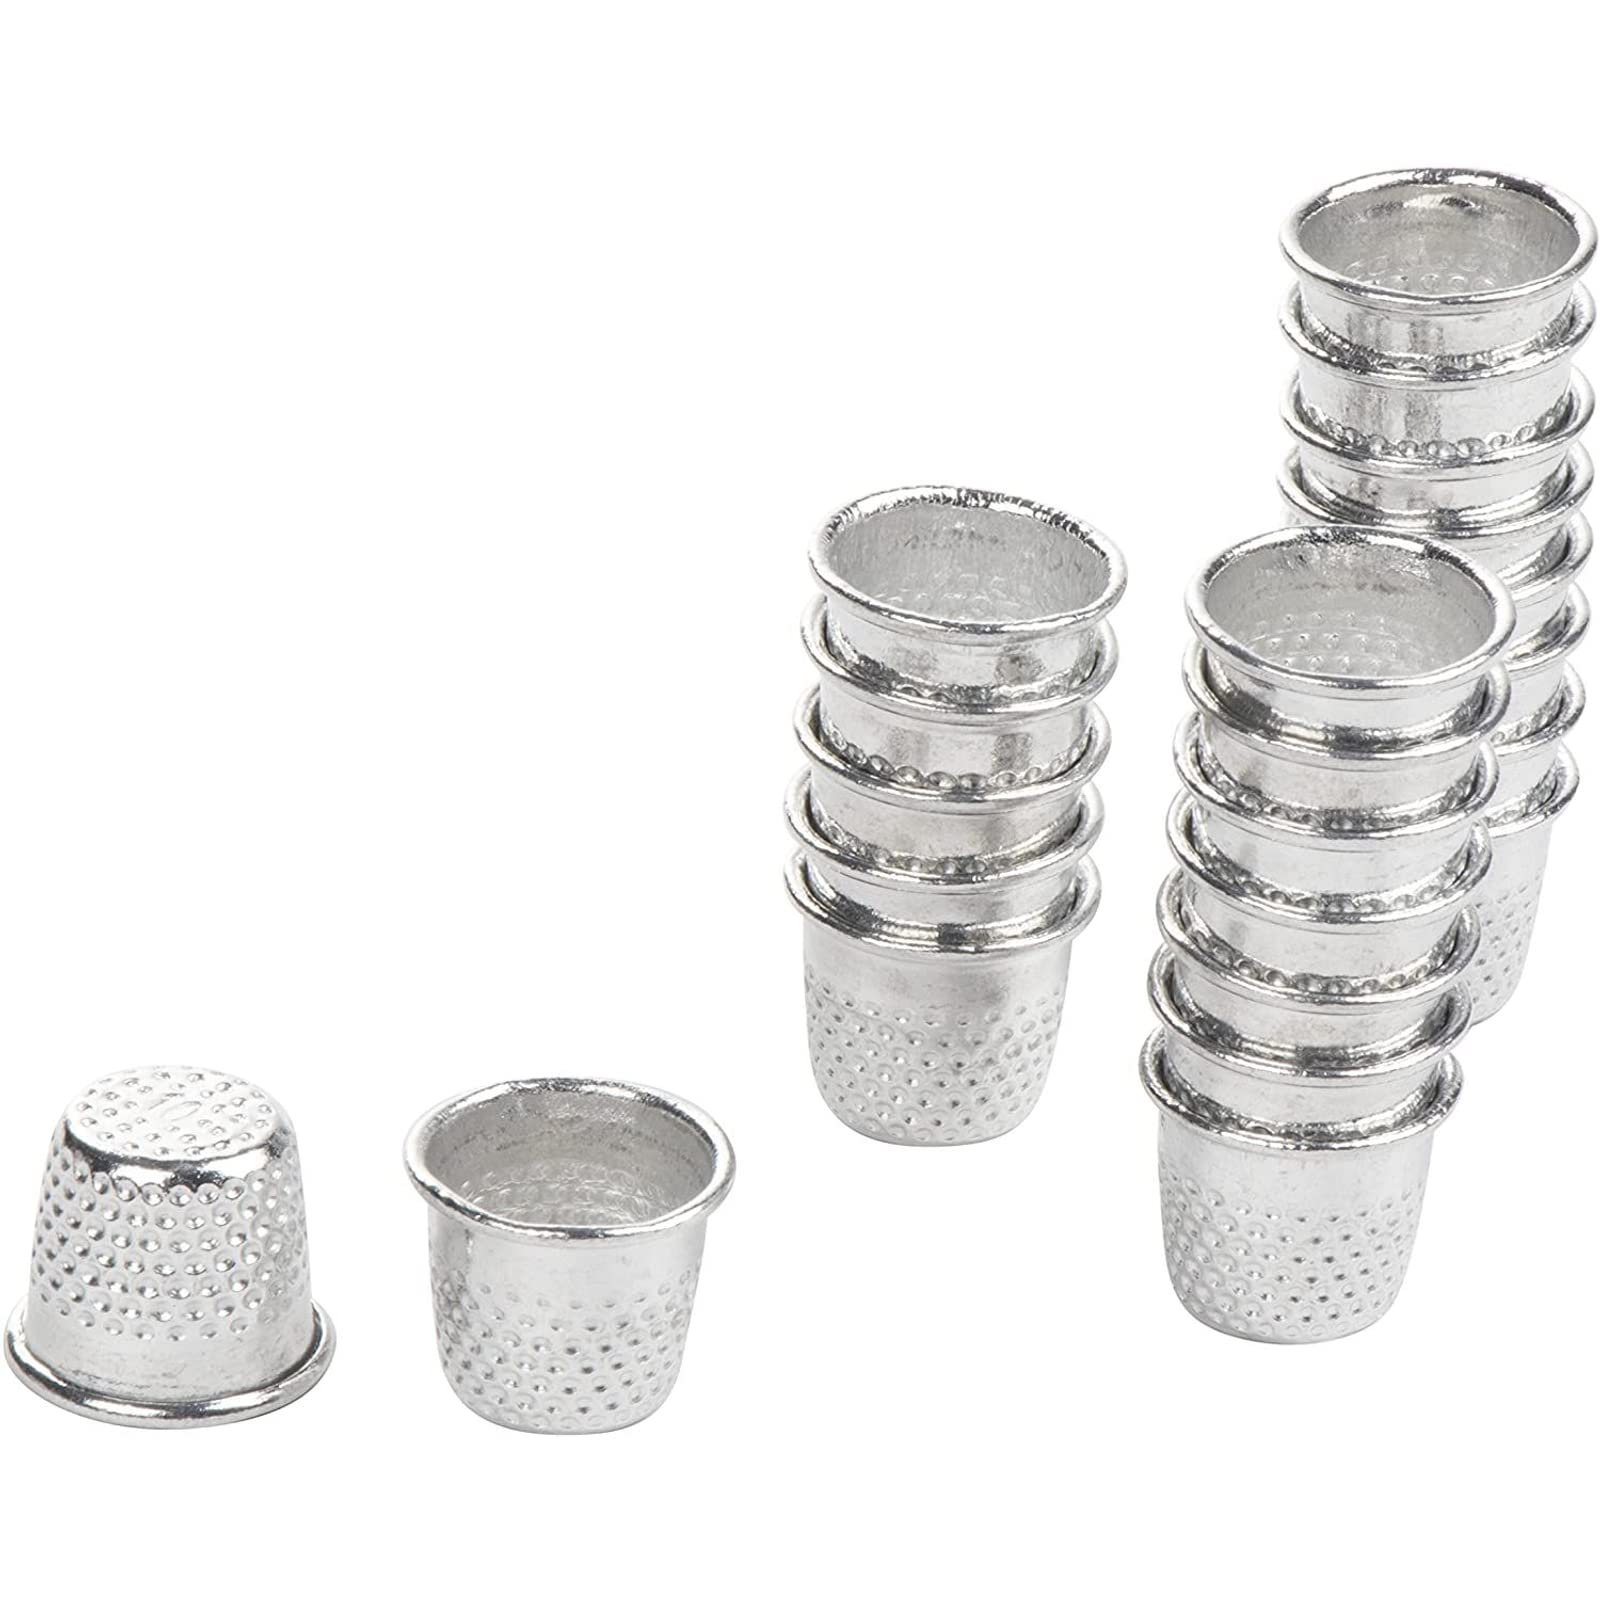 Juvale 100 Pack Thimbles for Sewing Stainless Steel